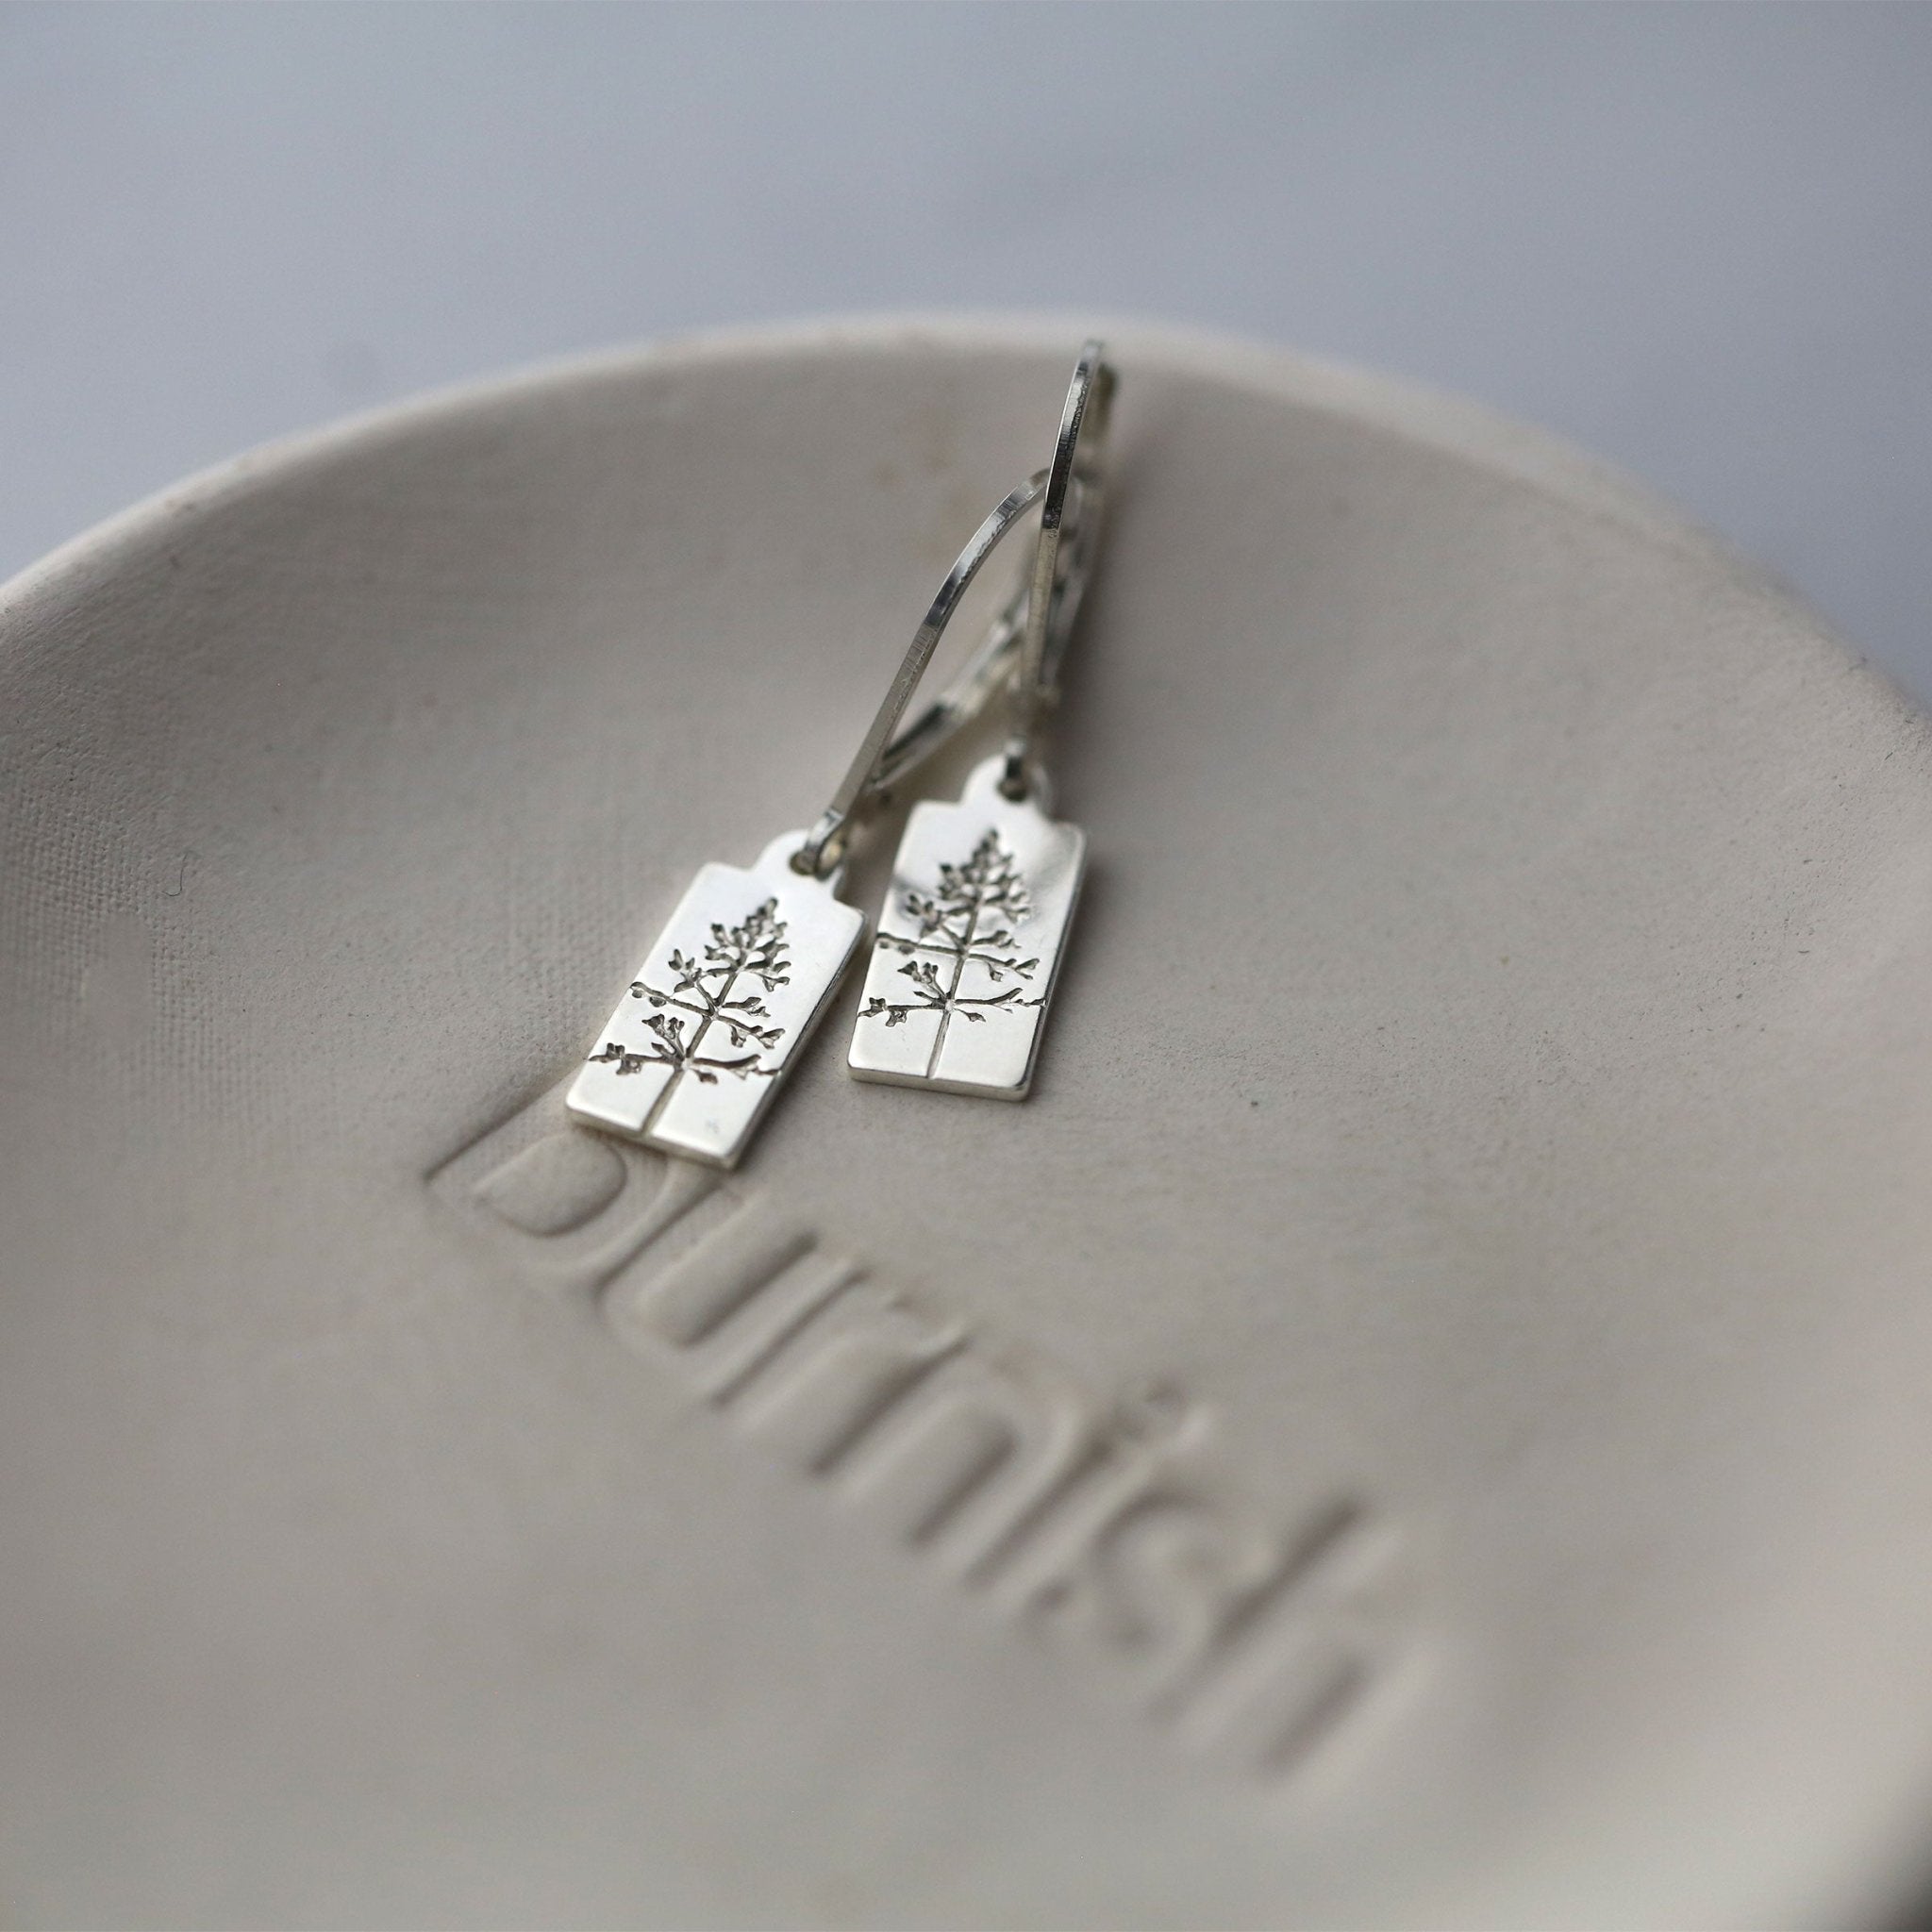 Hand Stamped Silver Tree Lever-back Earrings